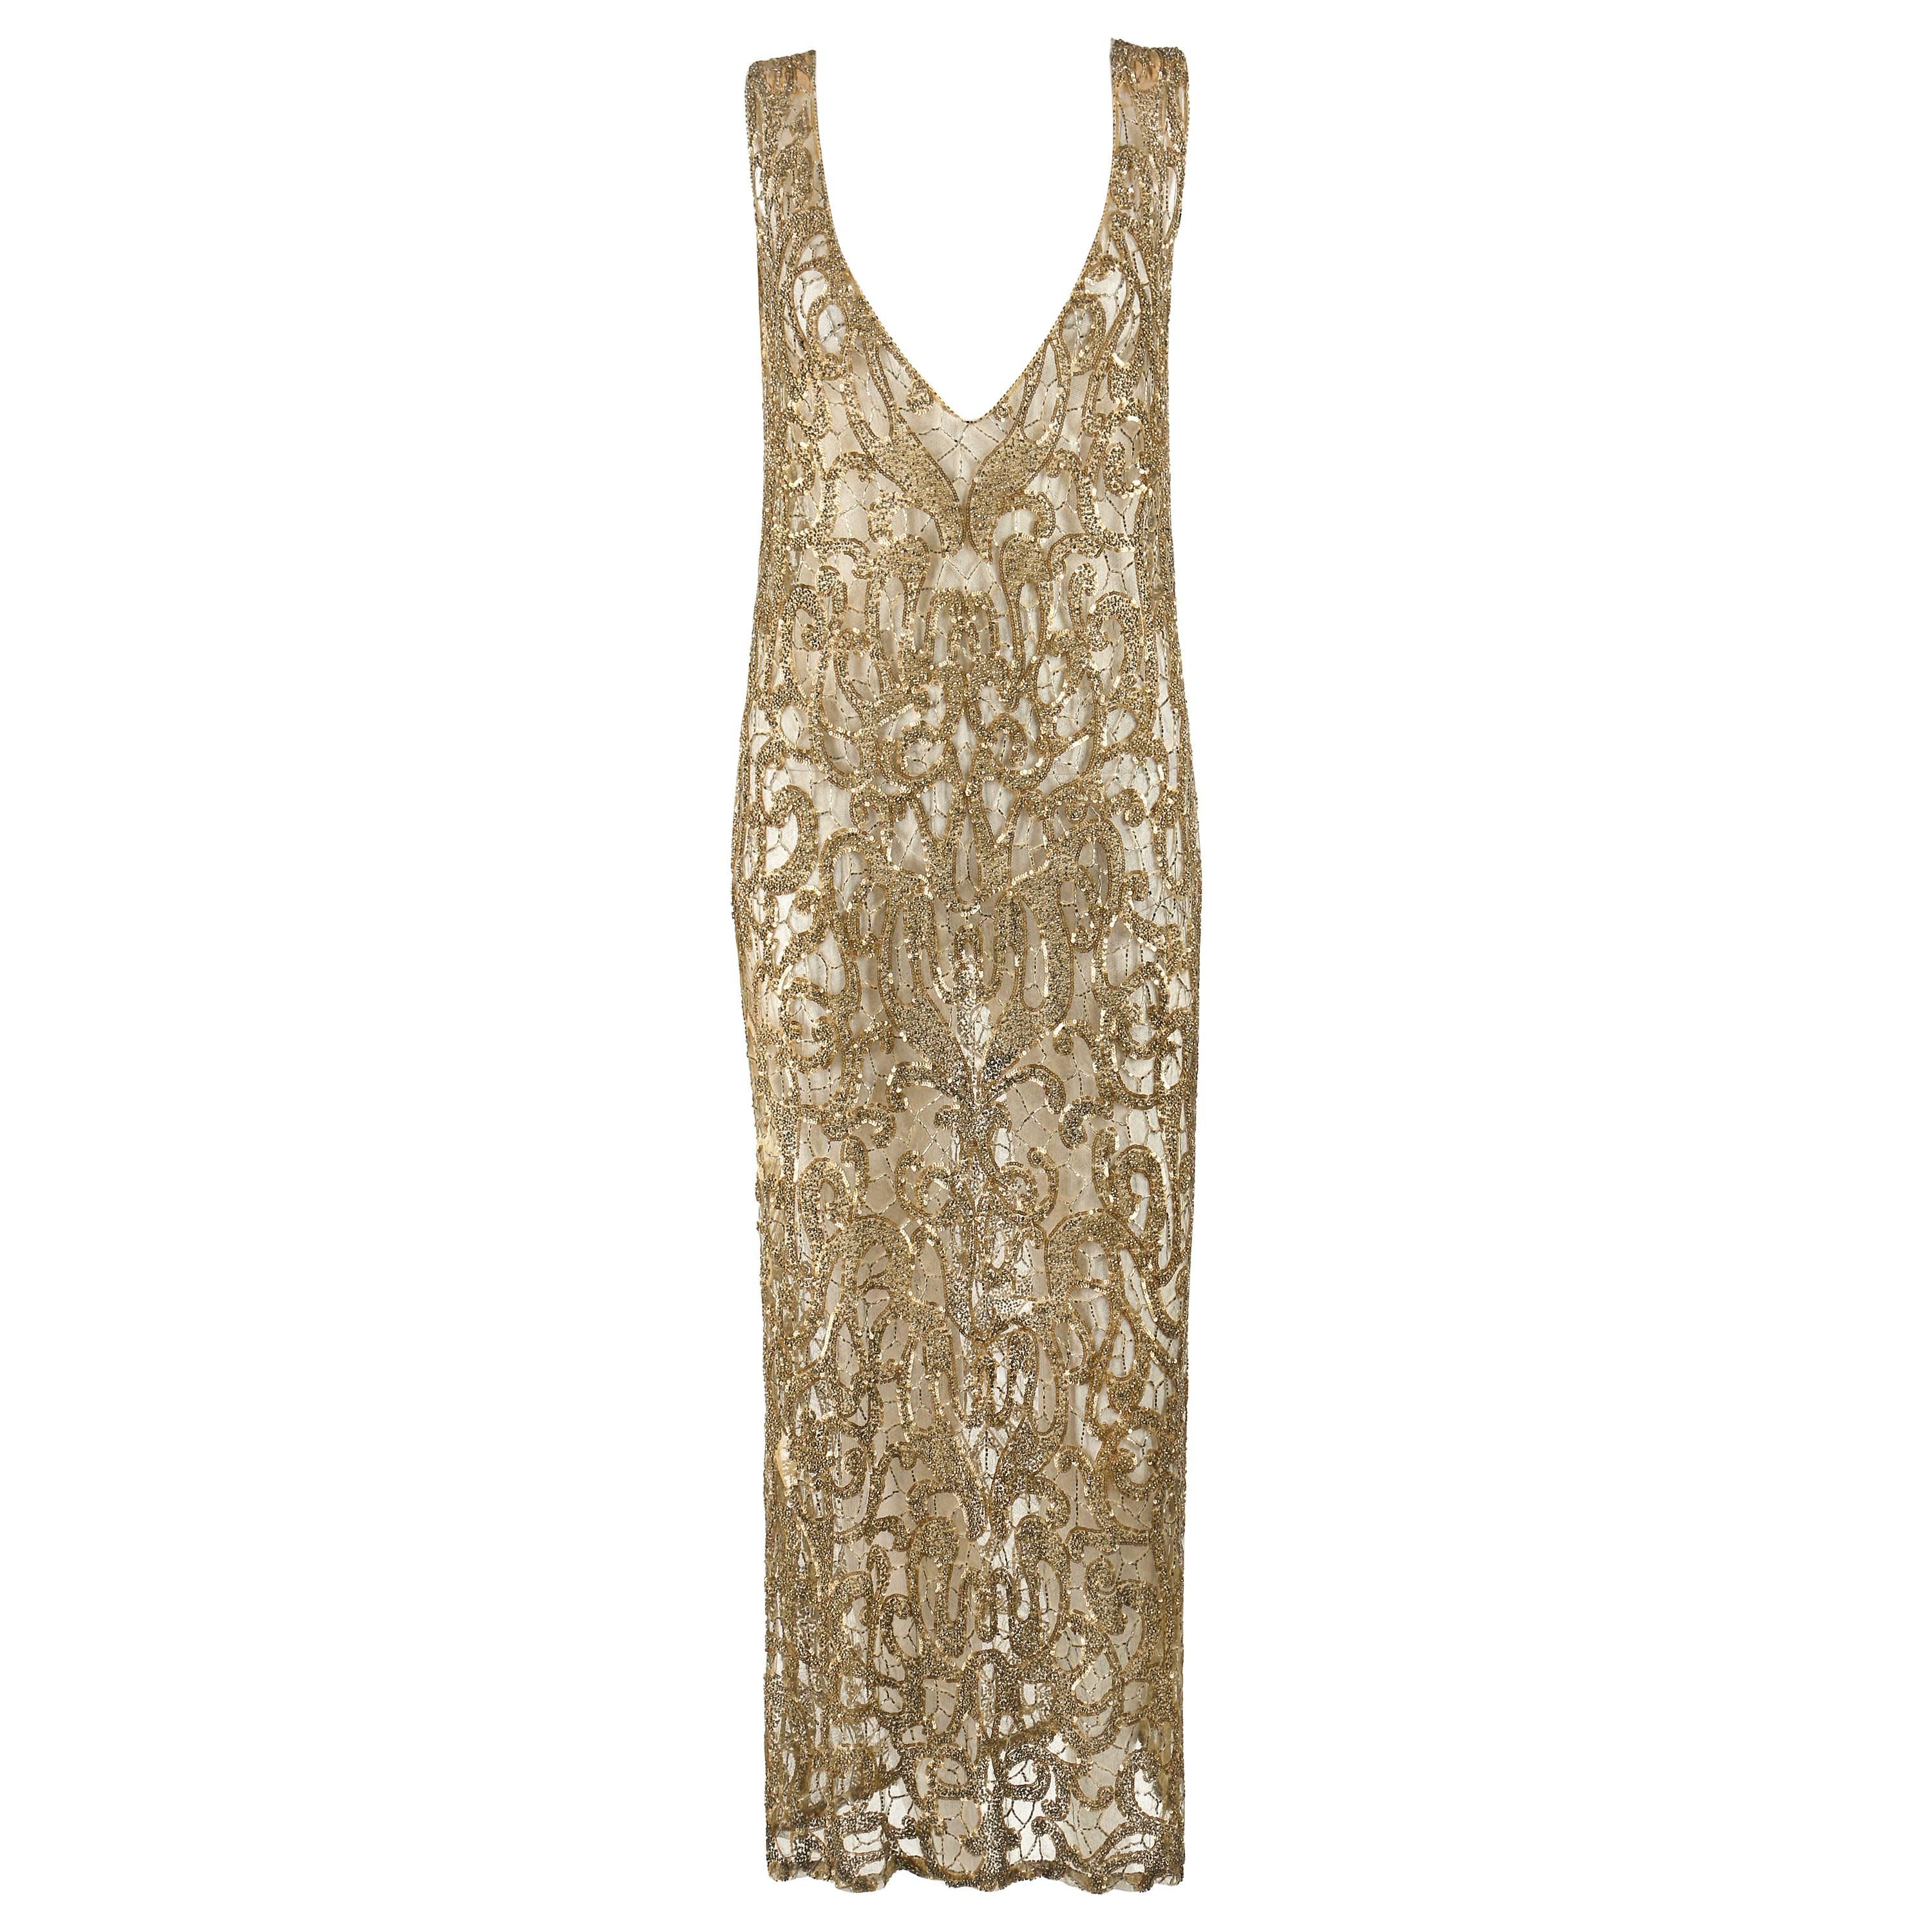 Couture c.1920's Gold Sequin Beaded Net Plunging Flapper Art Deco Evening Dress